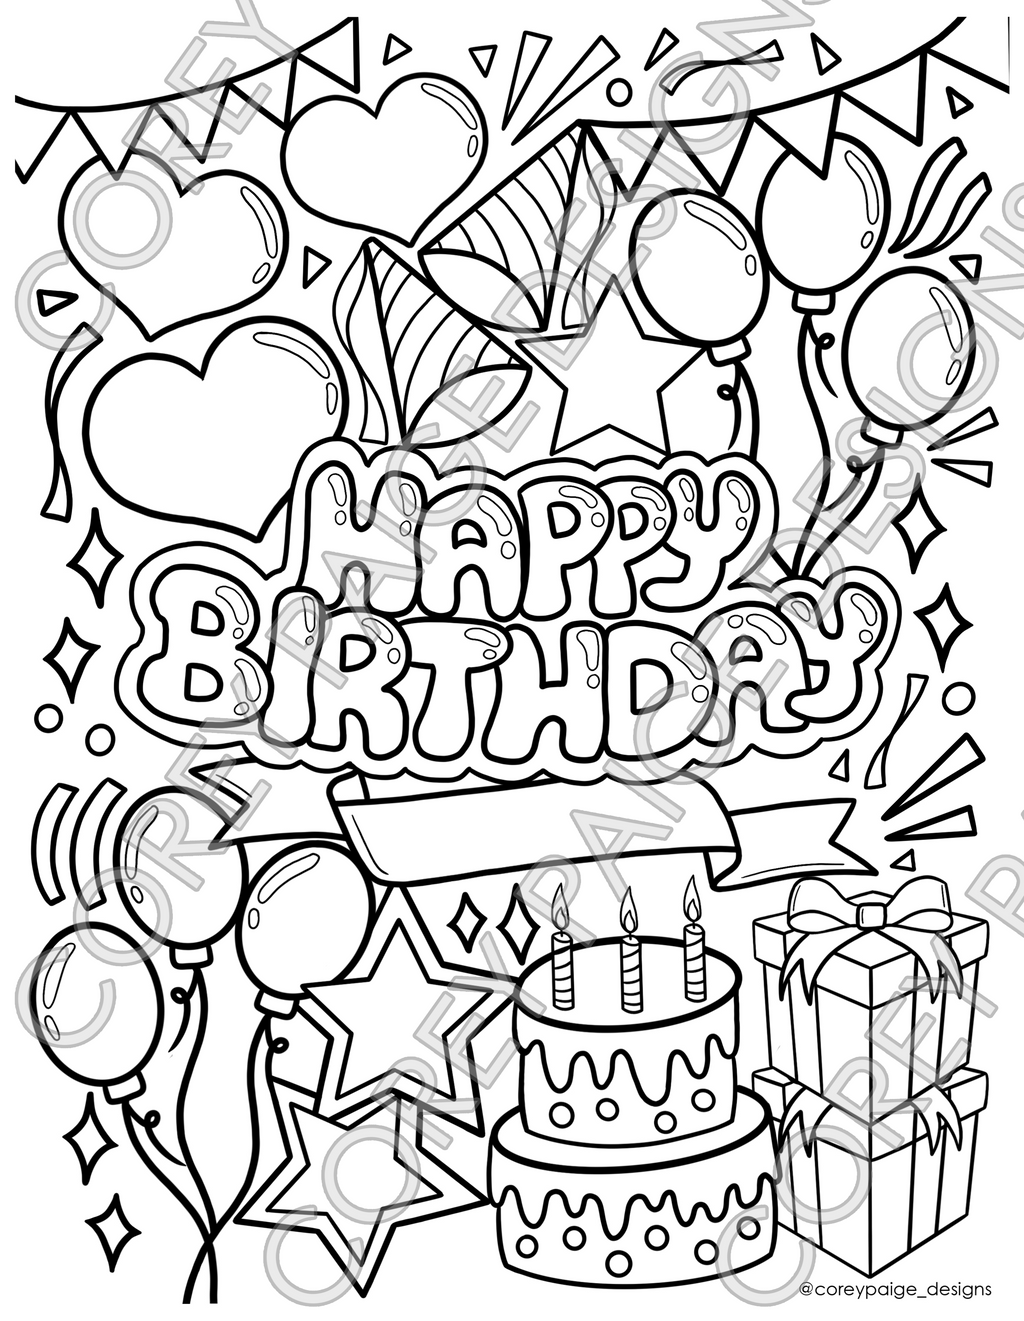 printable-coloring-pages-happy-birthday-customize-and-print